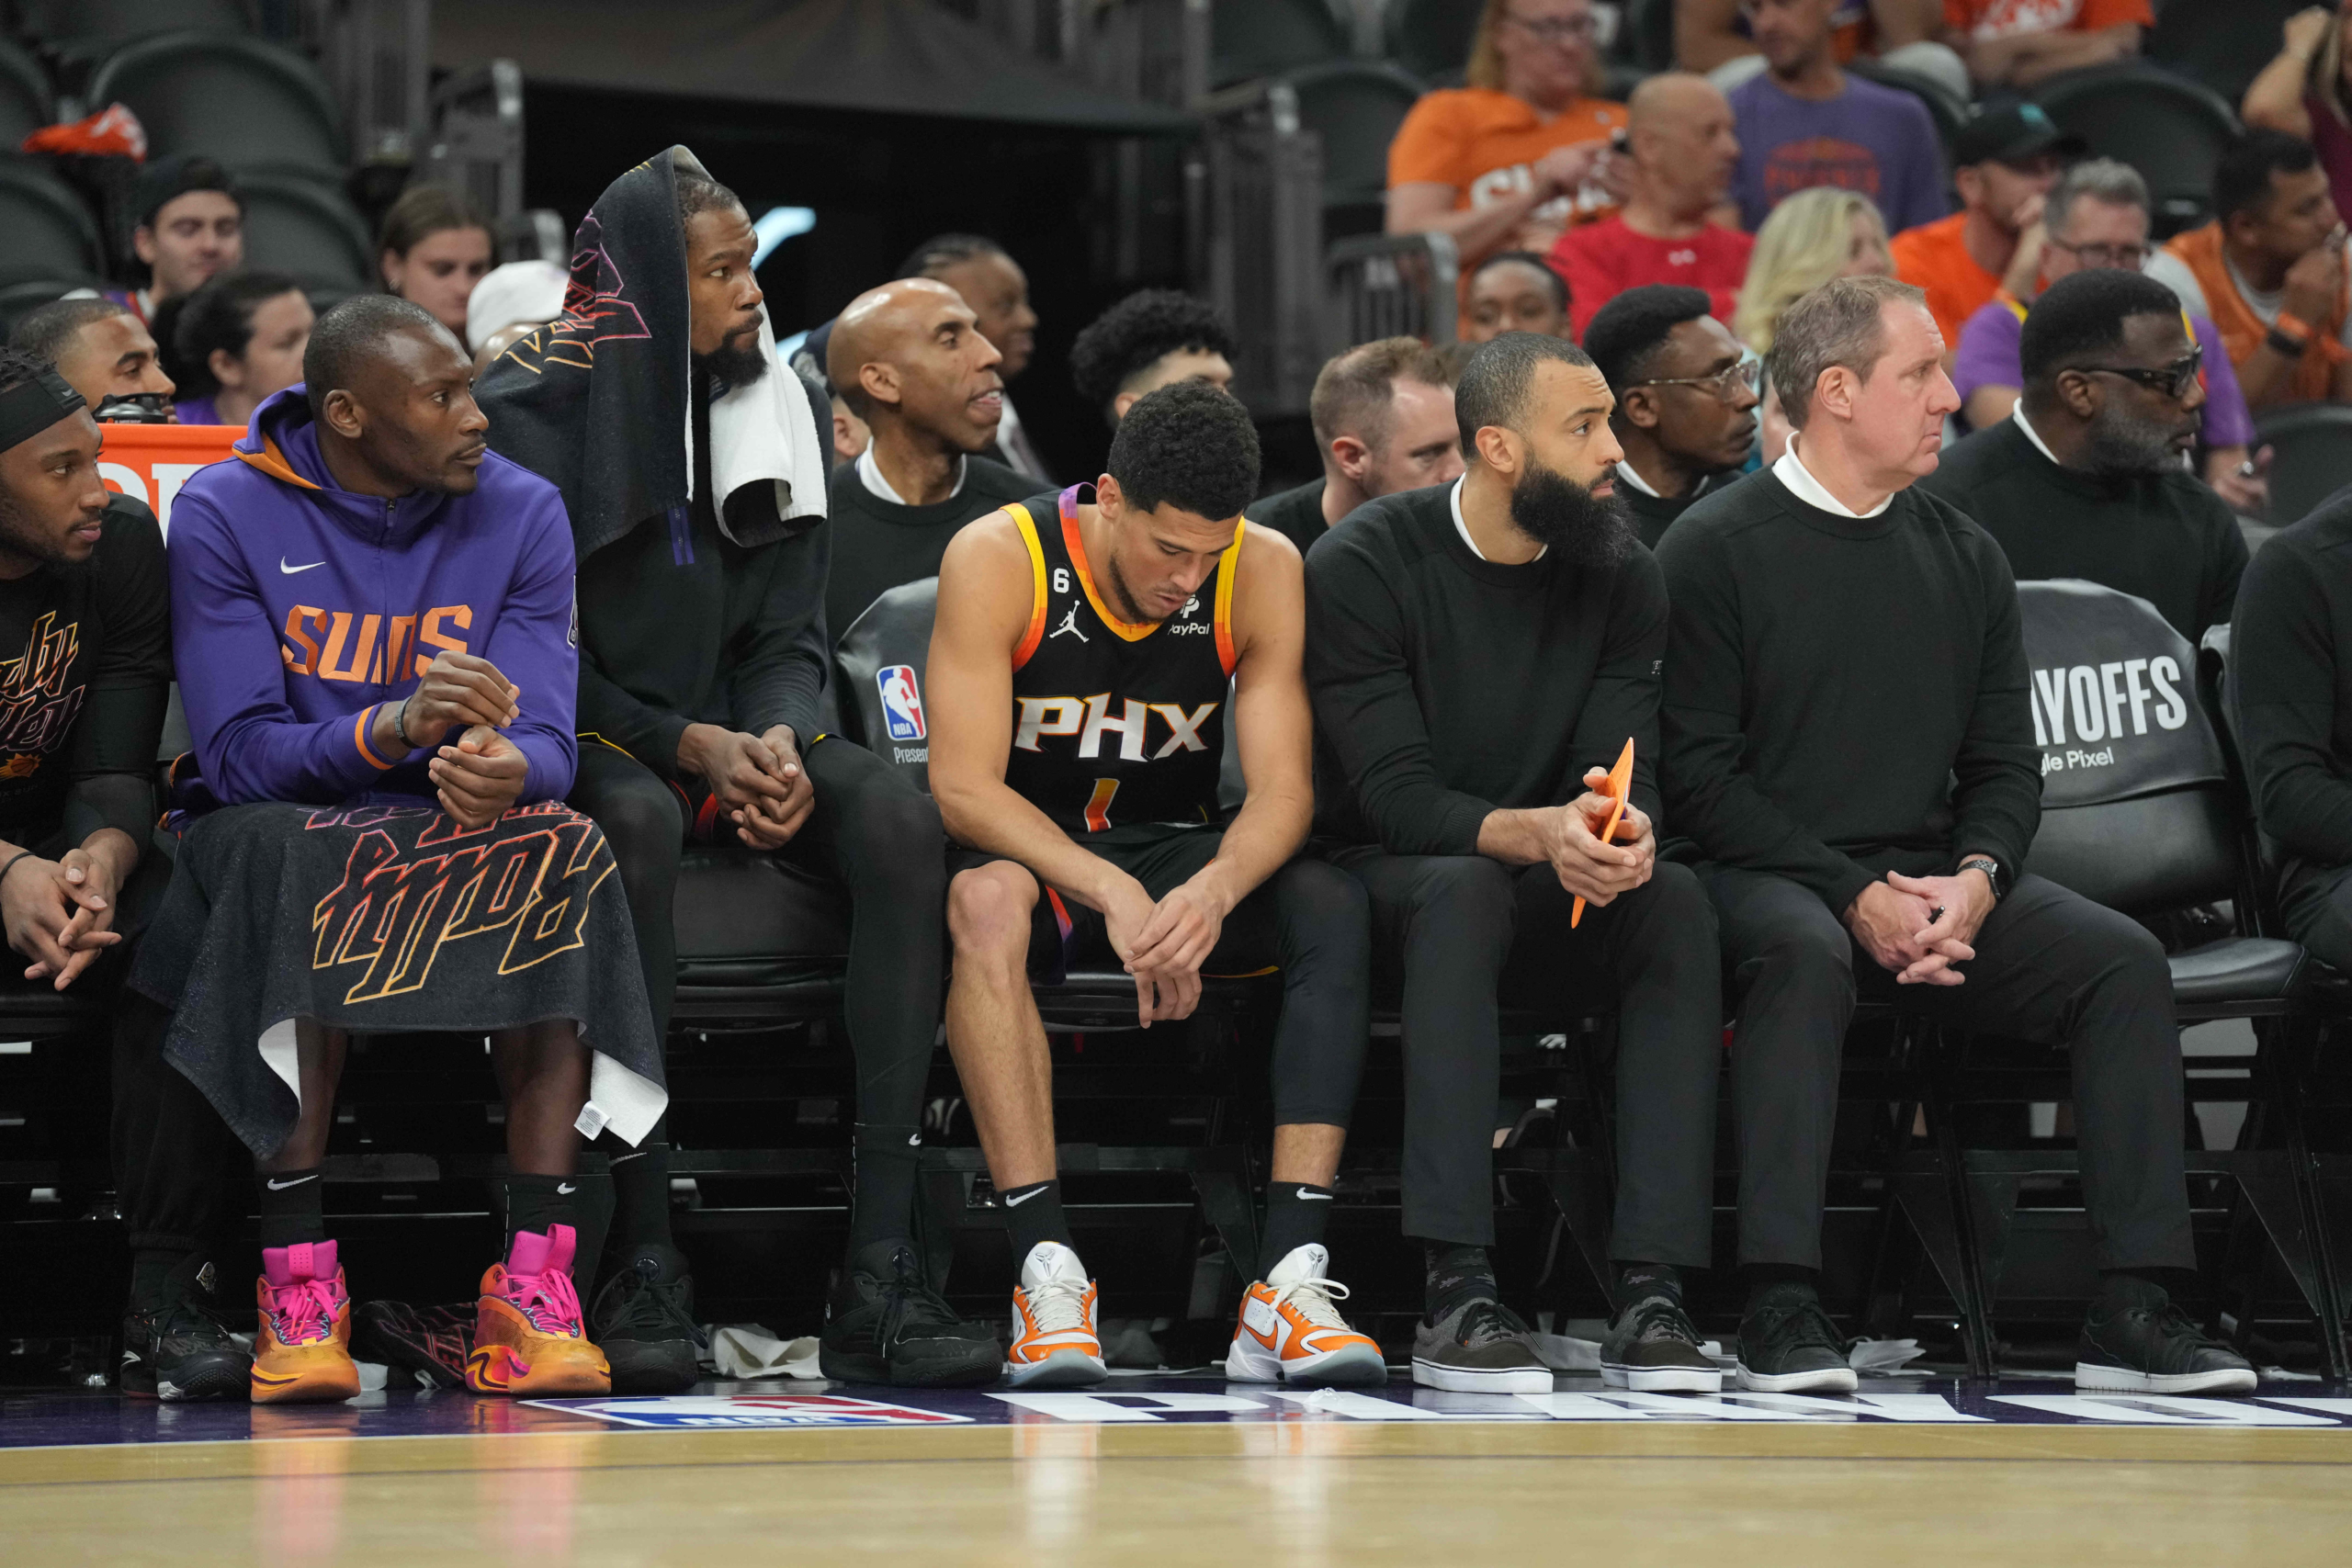 Monty Williams to be fired? Changes in store for Phoenix Suns